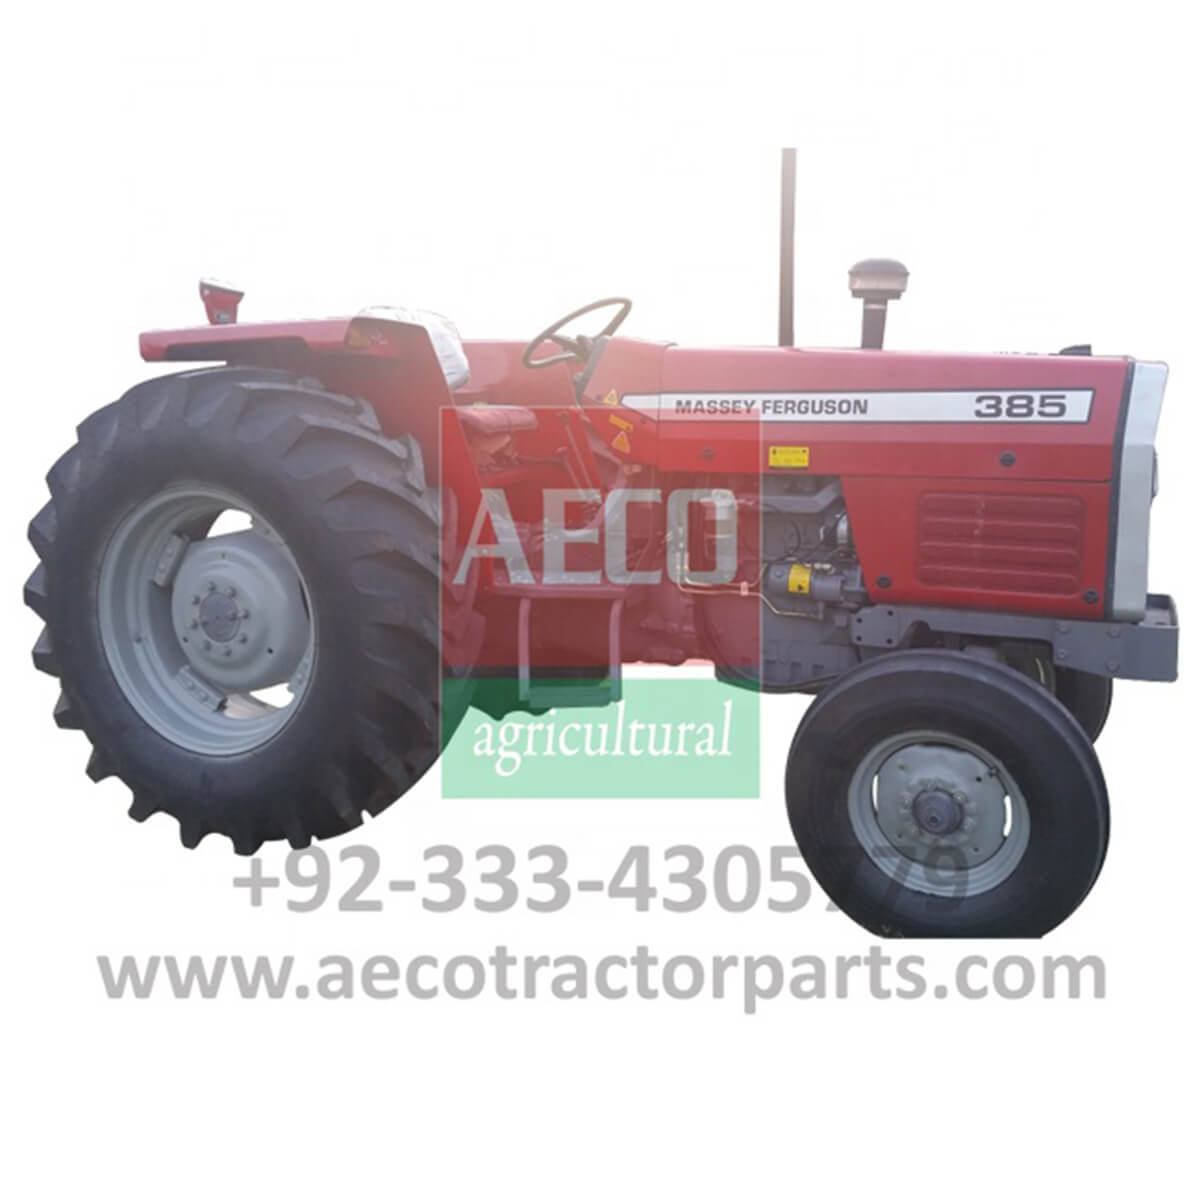 MF 385 2WD TRACTOR FOR SALE